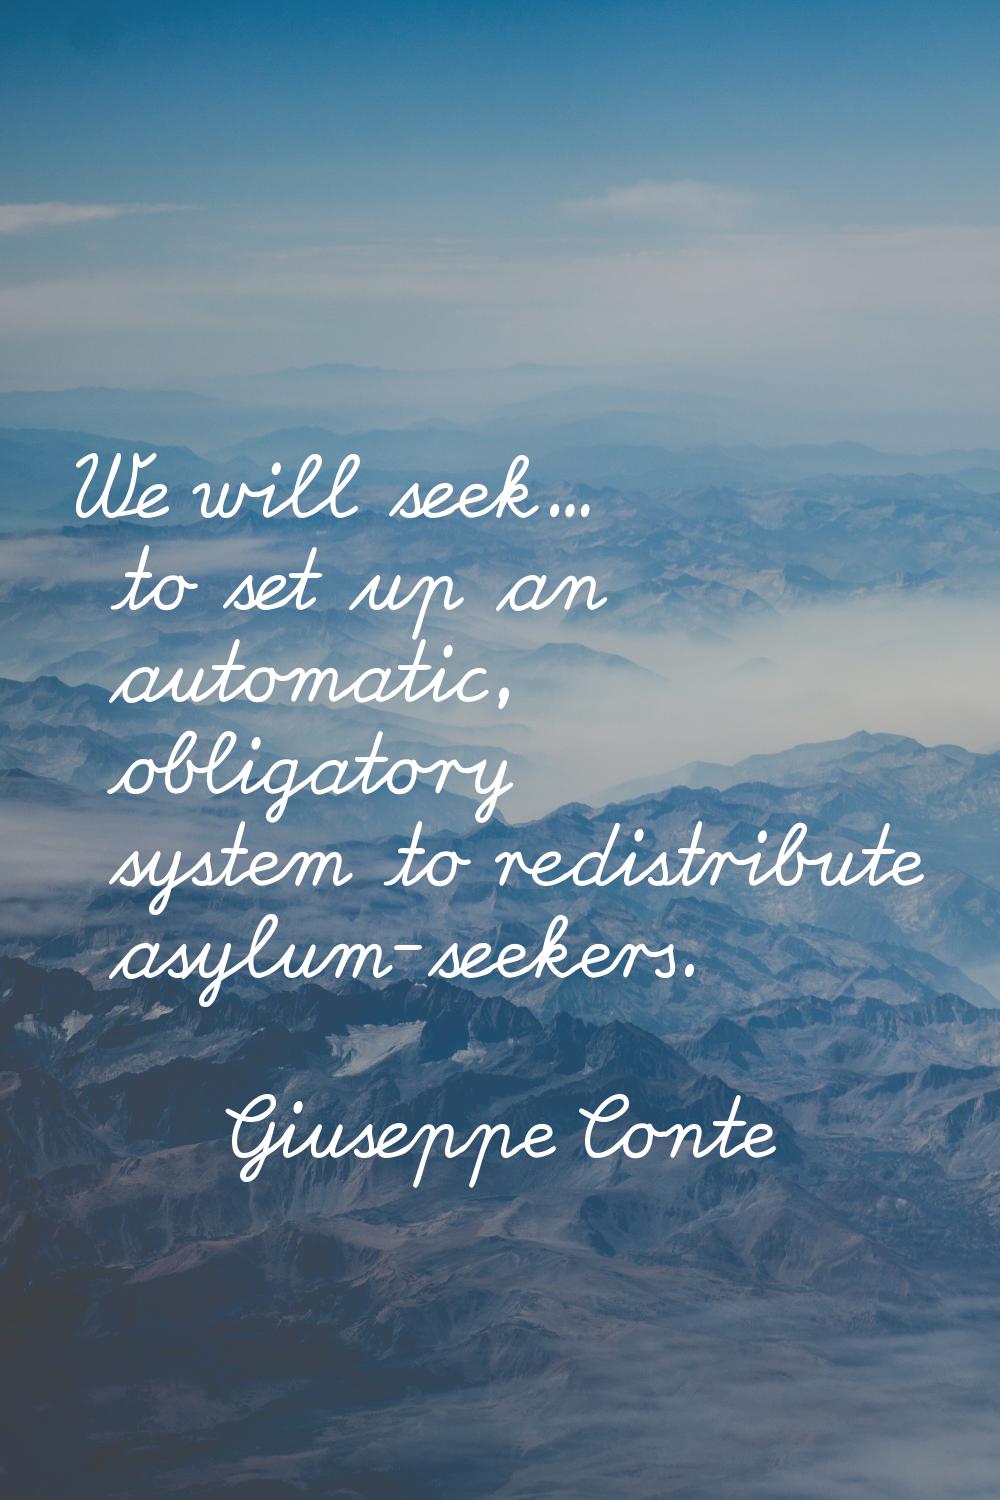 We will seek... to set up an automatic, obligatory system to redistribute asylum-seekers.